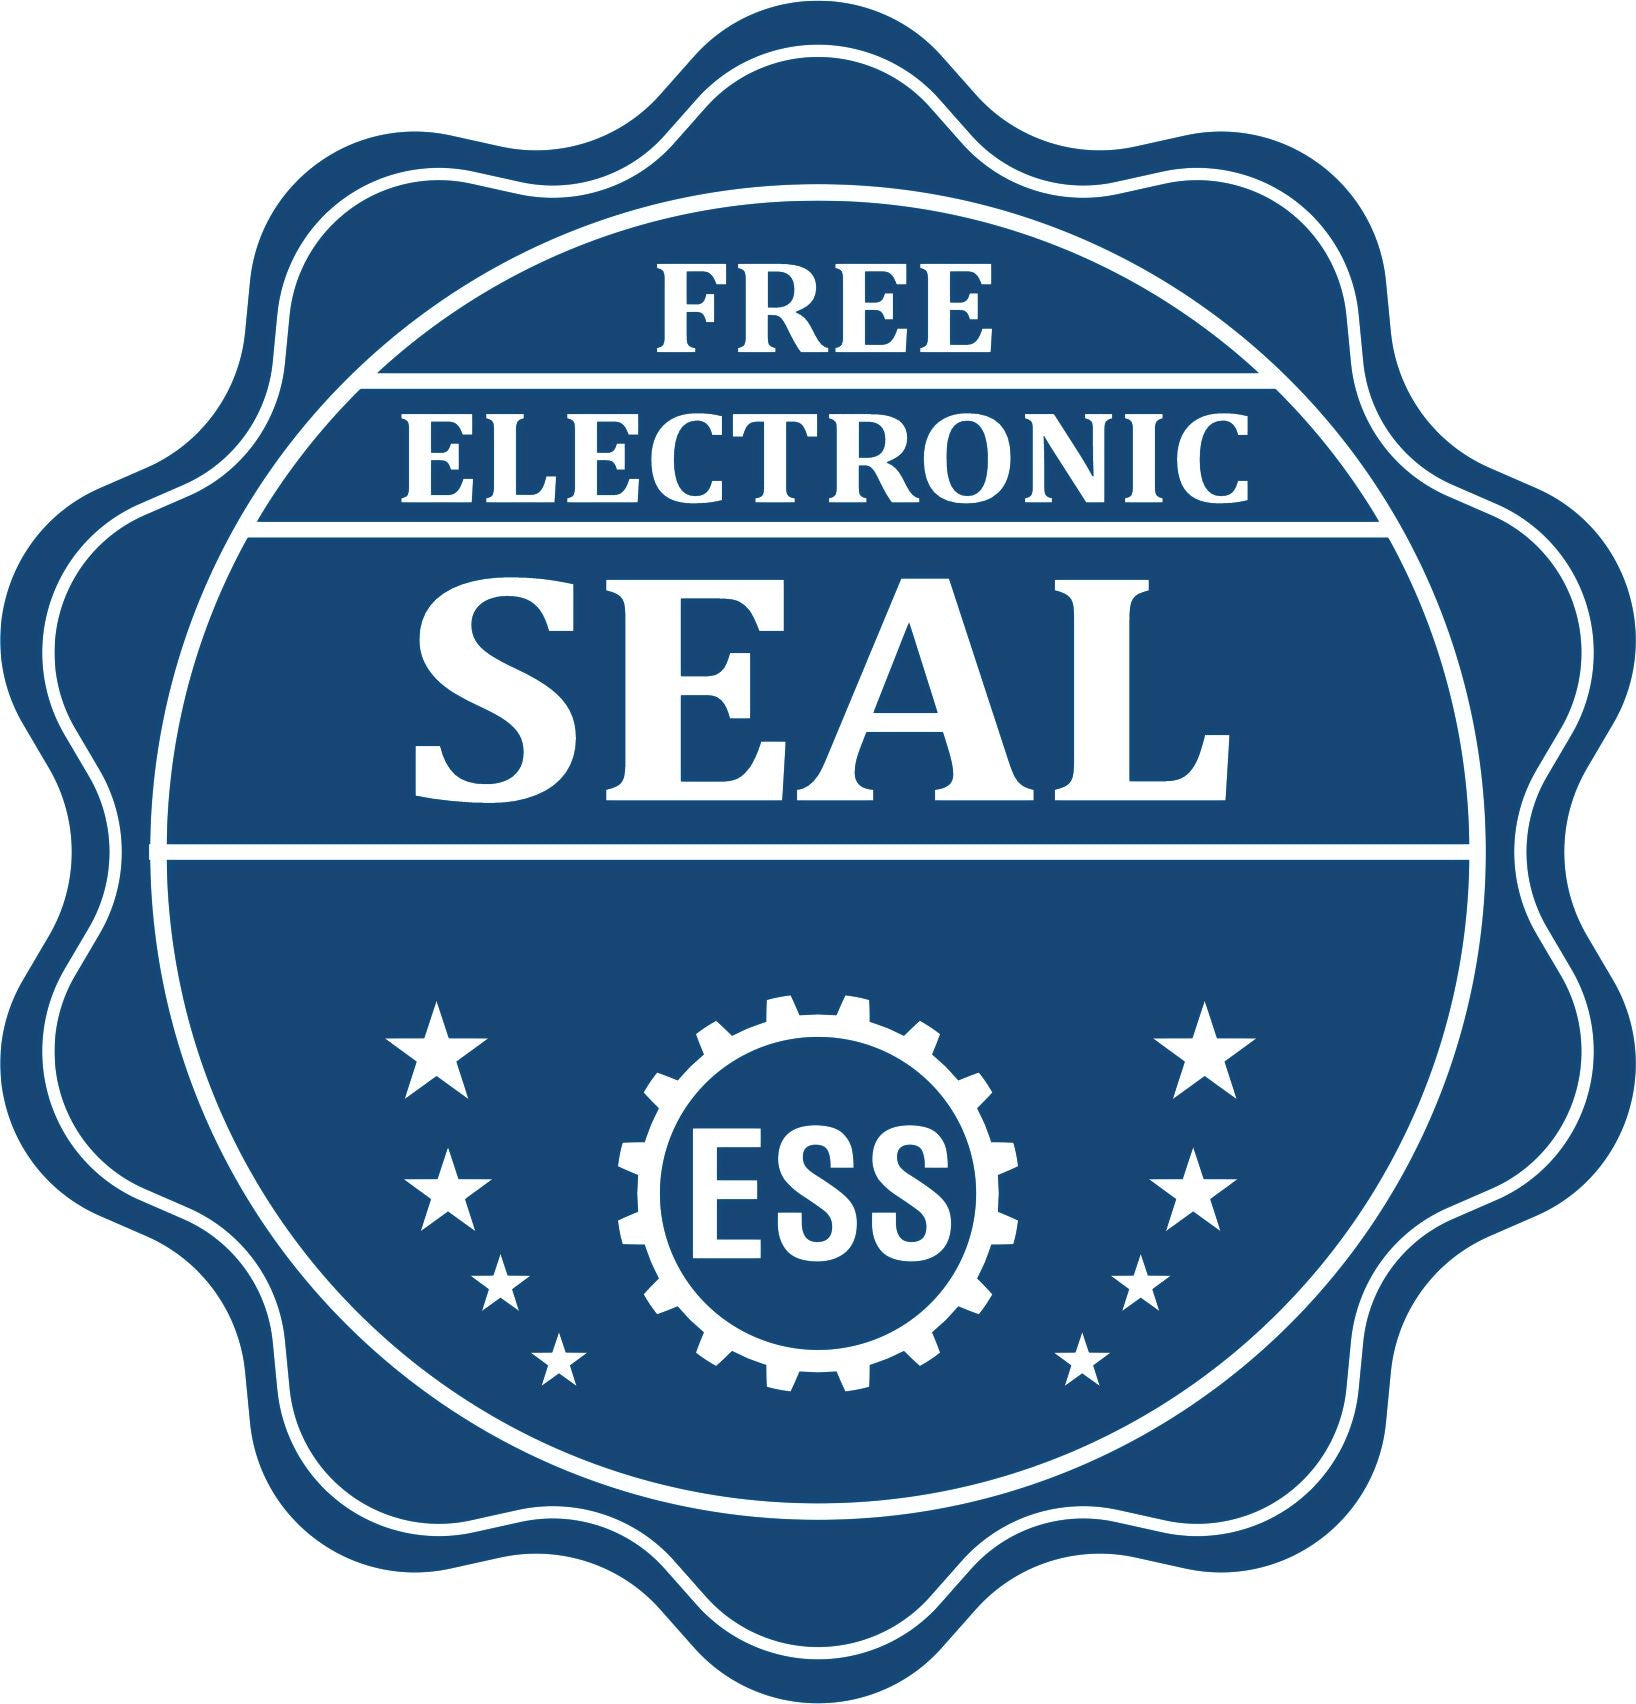 A badge showing a free electronic seal for the Slim Pre-Inked Iowa Professional Engineer Seal Stamp with stars and the ESS gear on the emblem.